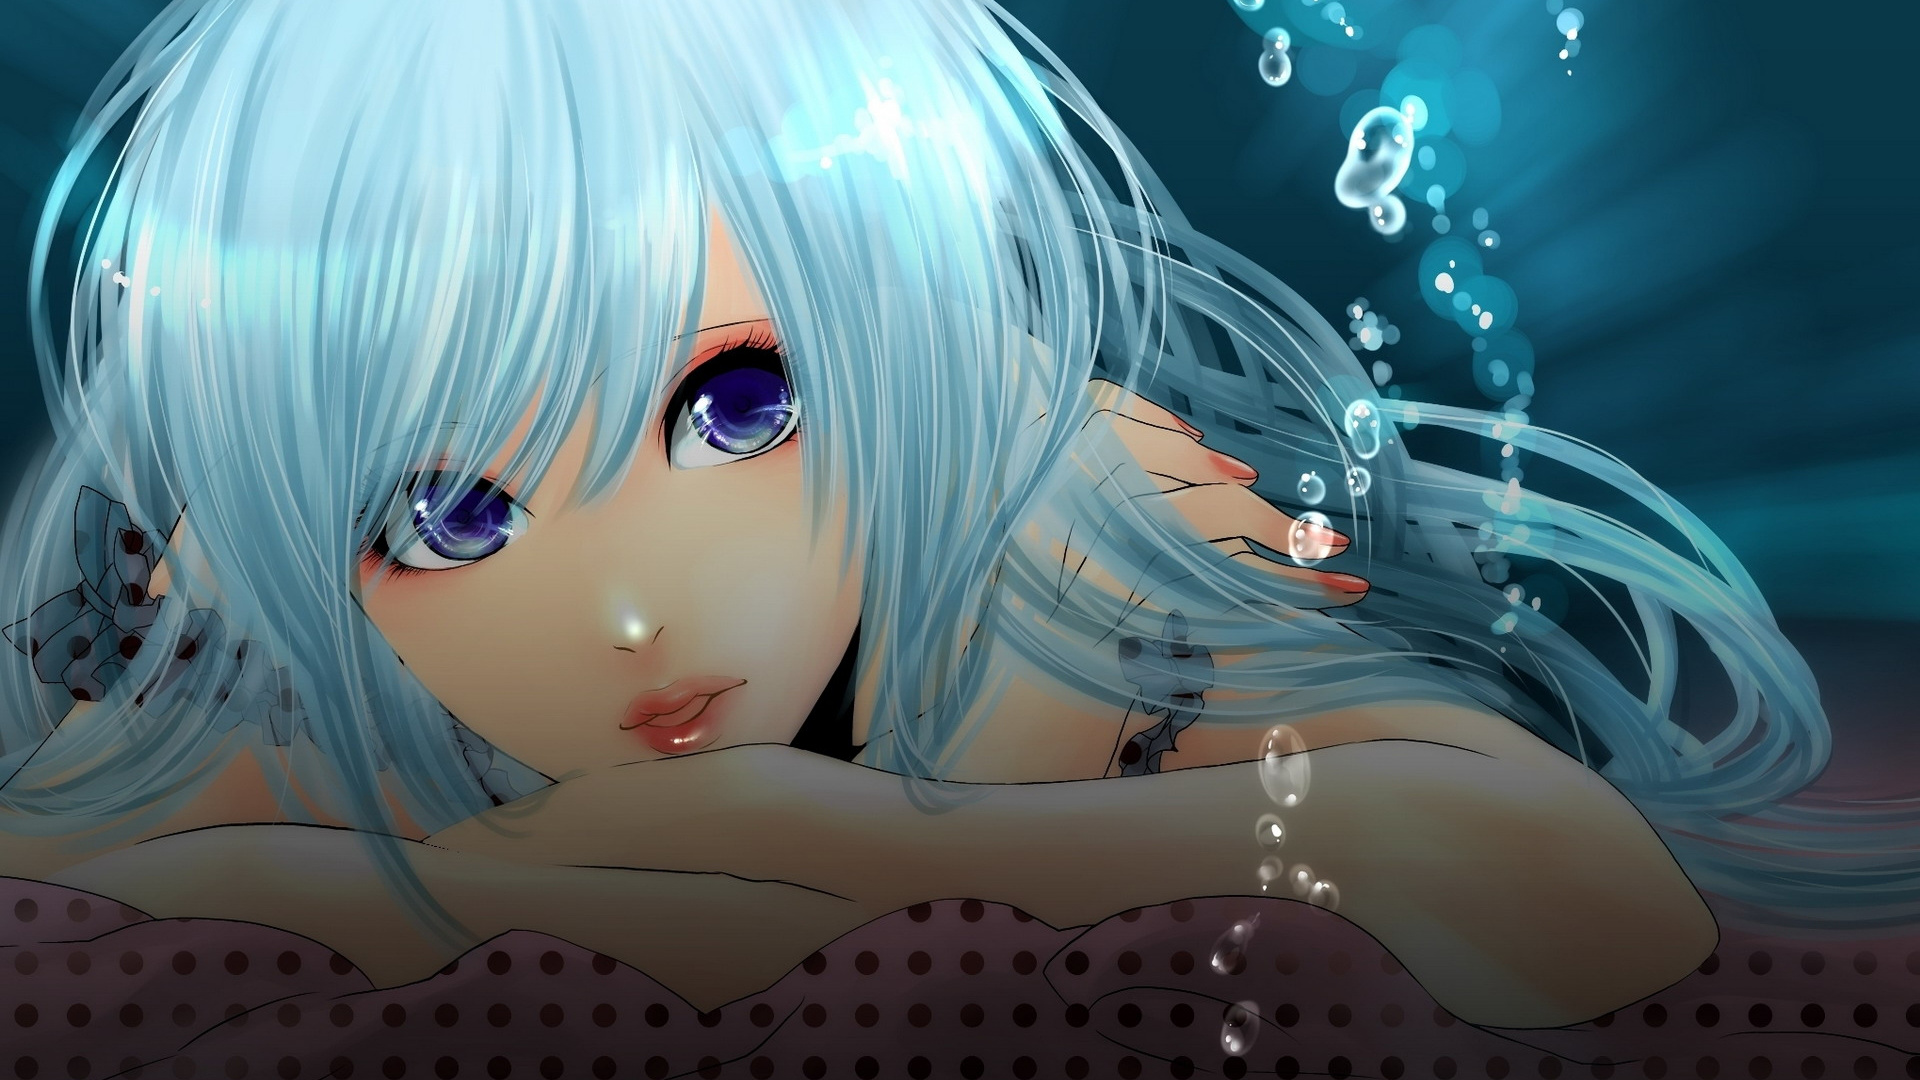 Blue Haired Female Anime Character. Wallpaper in 1920x1080 Resolution